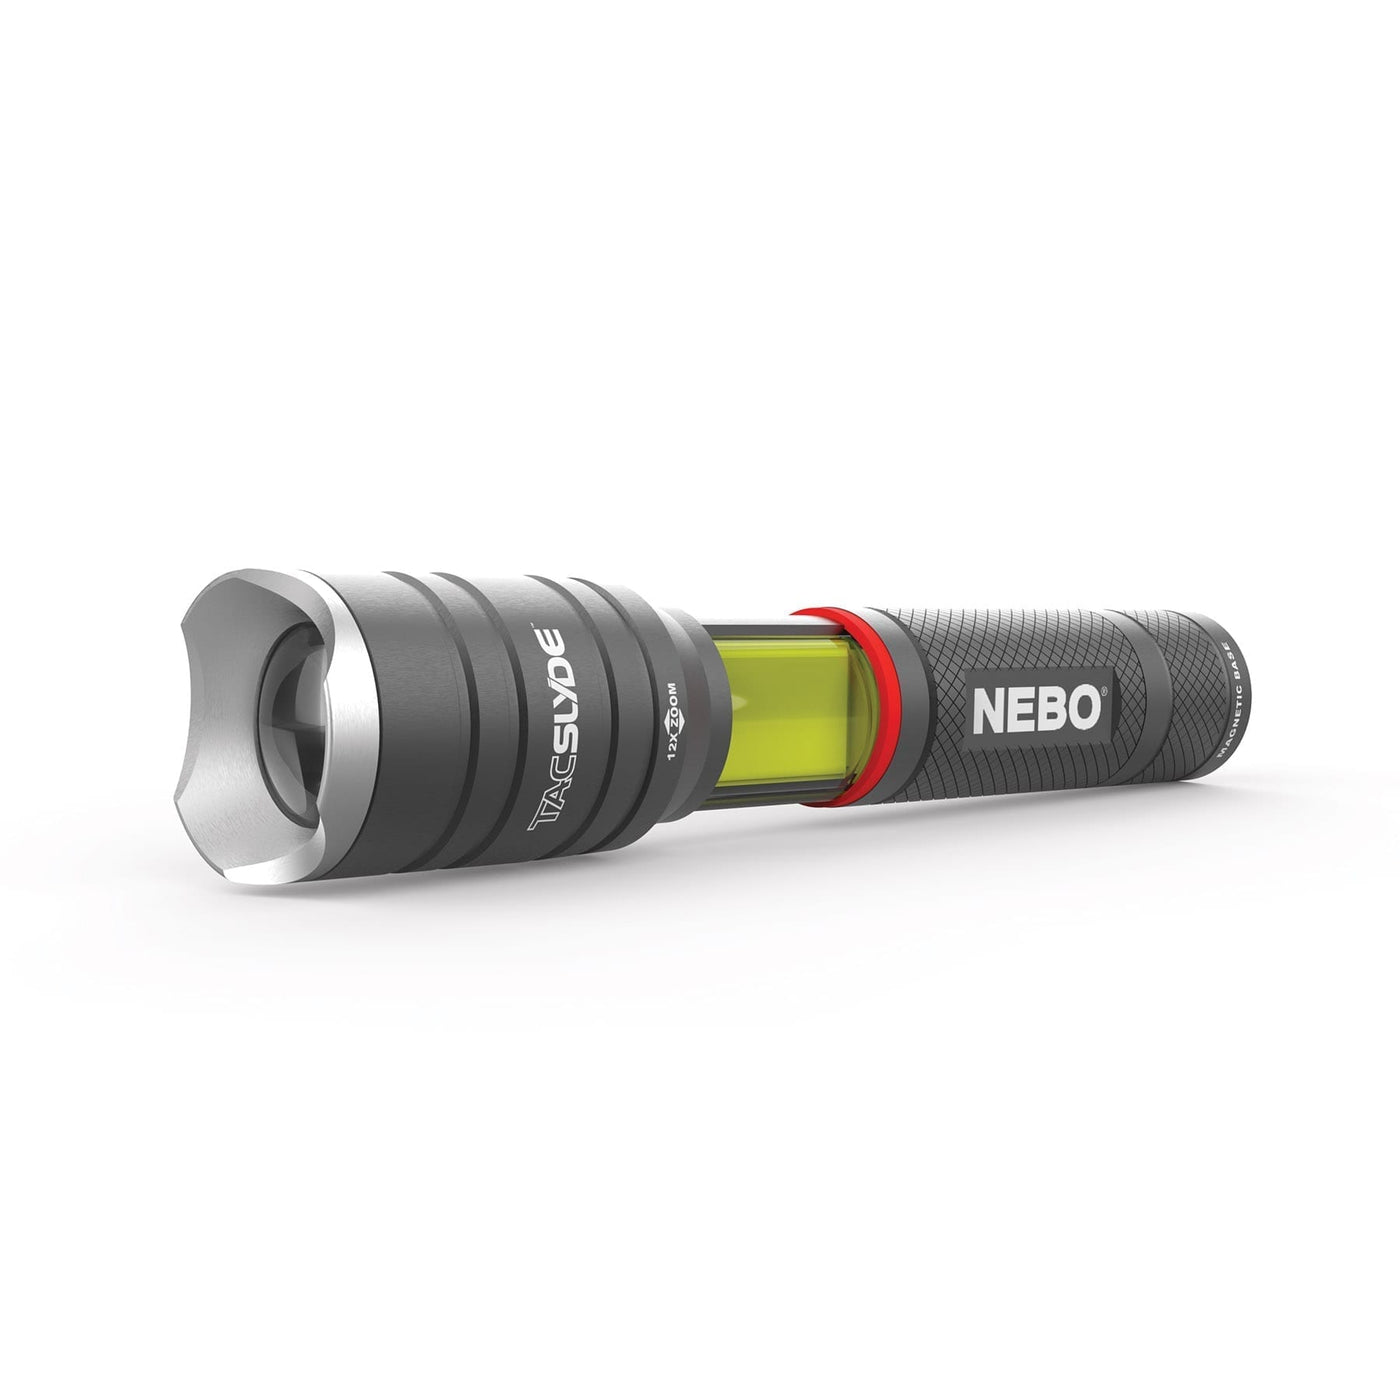 At Nebo Tools, we continually innovate so that we can offer the highest quality LED lighting products at the best price. The Tac Slyde™ features a 300 lumen flashlight with 12x adjustable zoom and 5 light modes. A COB lantern feature with 3 light modes, including emergency red flash, is also available upon extension of the light. A powerful magnetic base provides convenient hands-free lighting, and the lanyard helps keep this light handy when you need it most.